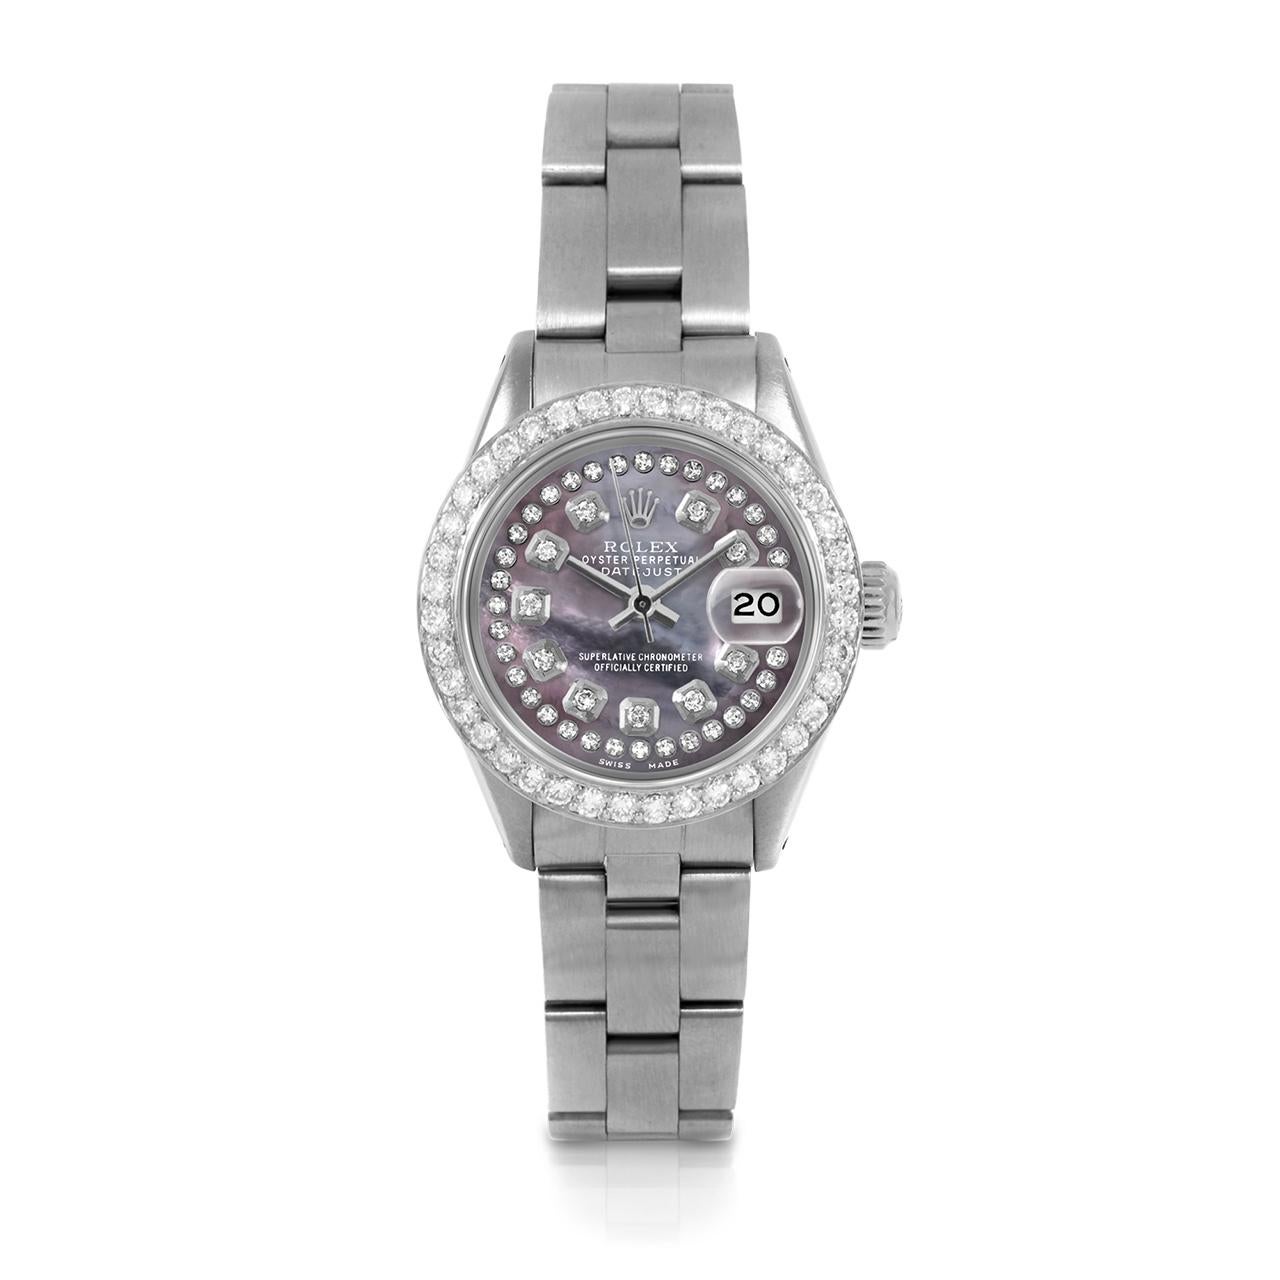 Pre-Owned Rolex 6917 Ladies 26mm Datejust Watch, Custom Black Mother of Pearl String Diamond Dial & Custom 1ct Diamond Bezel on Rolex Stainless Steel Oyster Band.   

SKU 6917-SS-BMOP-STRD-BDS-OYS


Brand/Model:        Rolex Datejust
Model Number:  